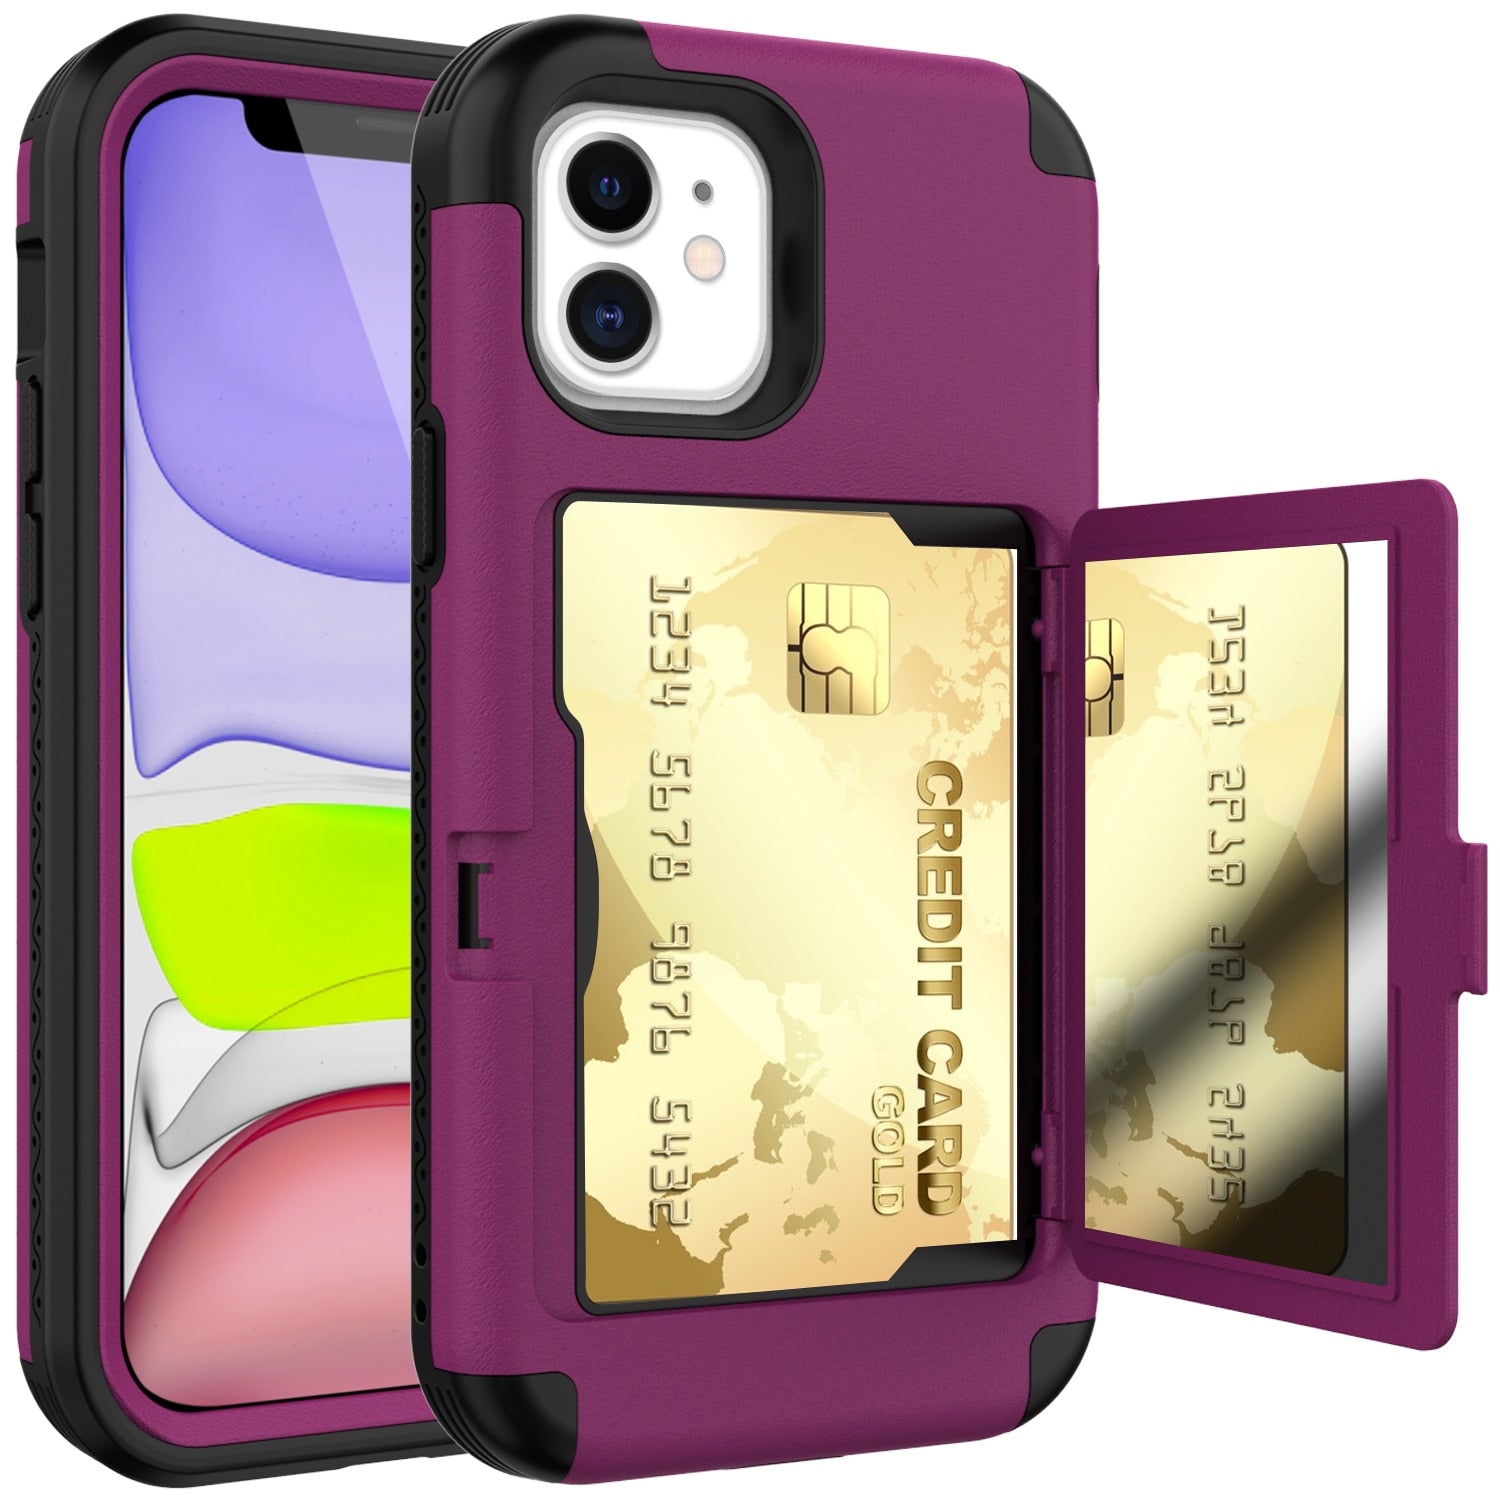 For iPhone 12 mini Pro Max Case With Wallet Card Hidden Credit Card Cover For iPhone 12 Pro Max with mirror Case for iPhone 12 - 380230 For iPhone 12 Mini / purple / United States Find Epic Store